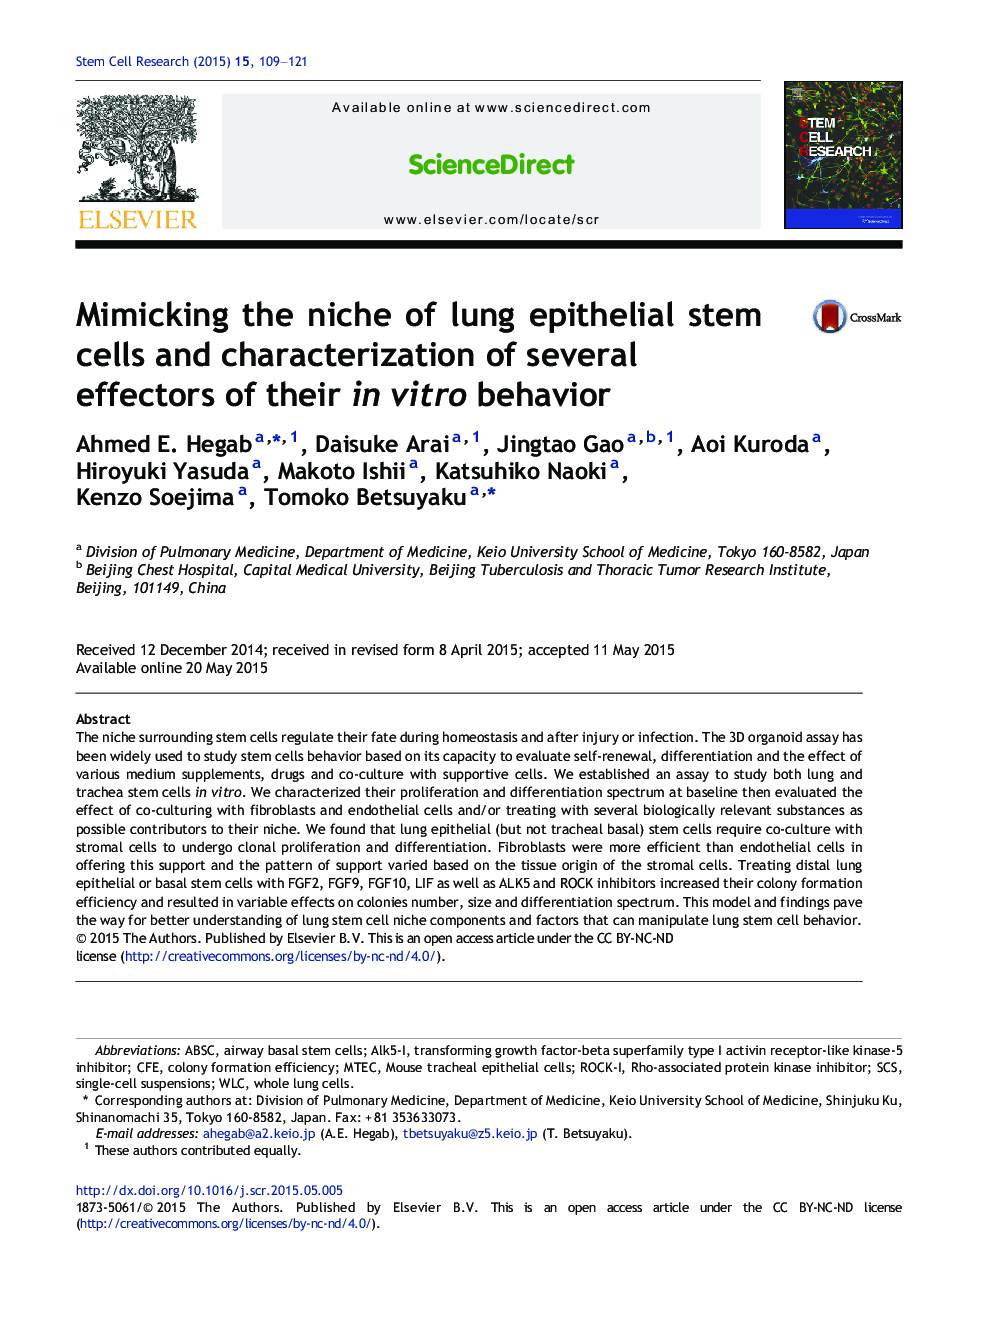 Mimicking the niche of lung epithelial stem cells and characterization of several effectors of their in vitro behavior